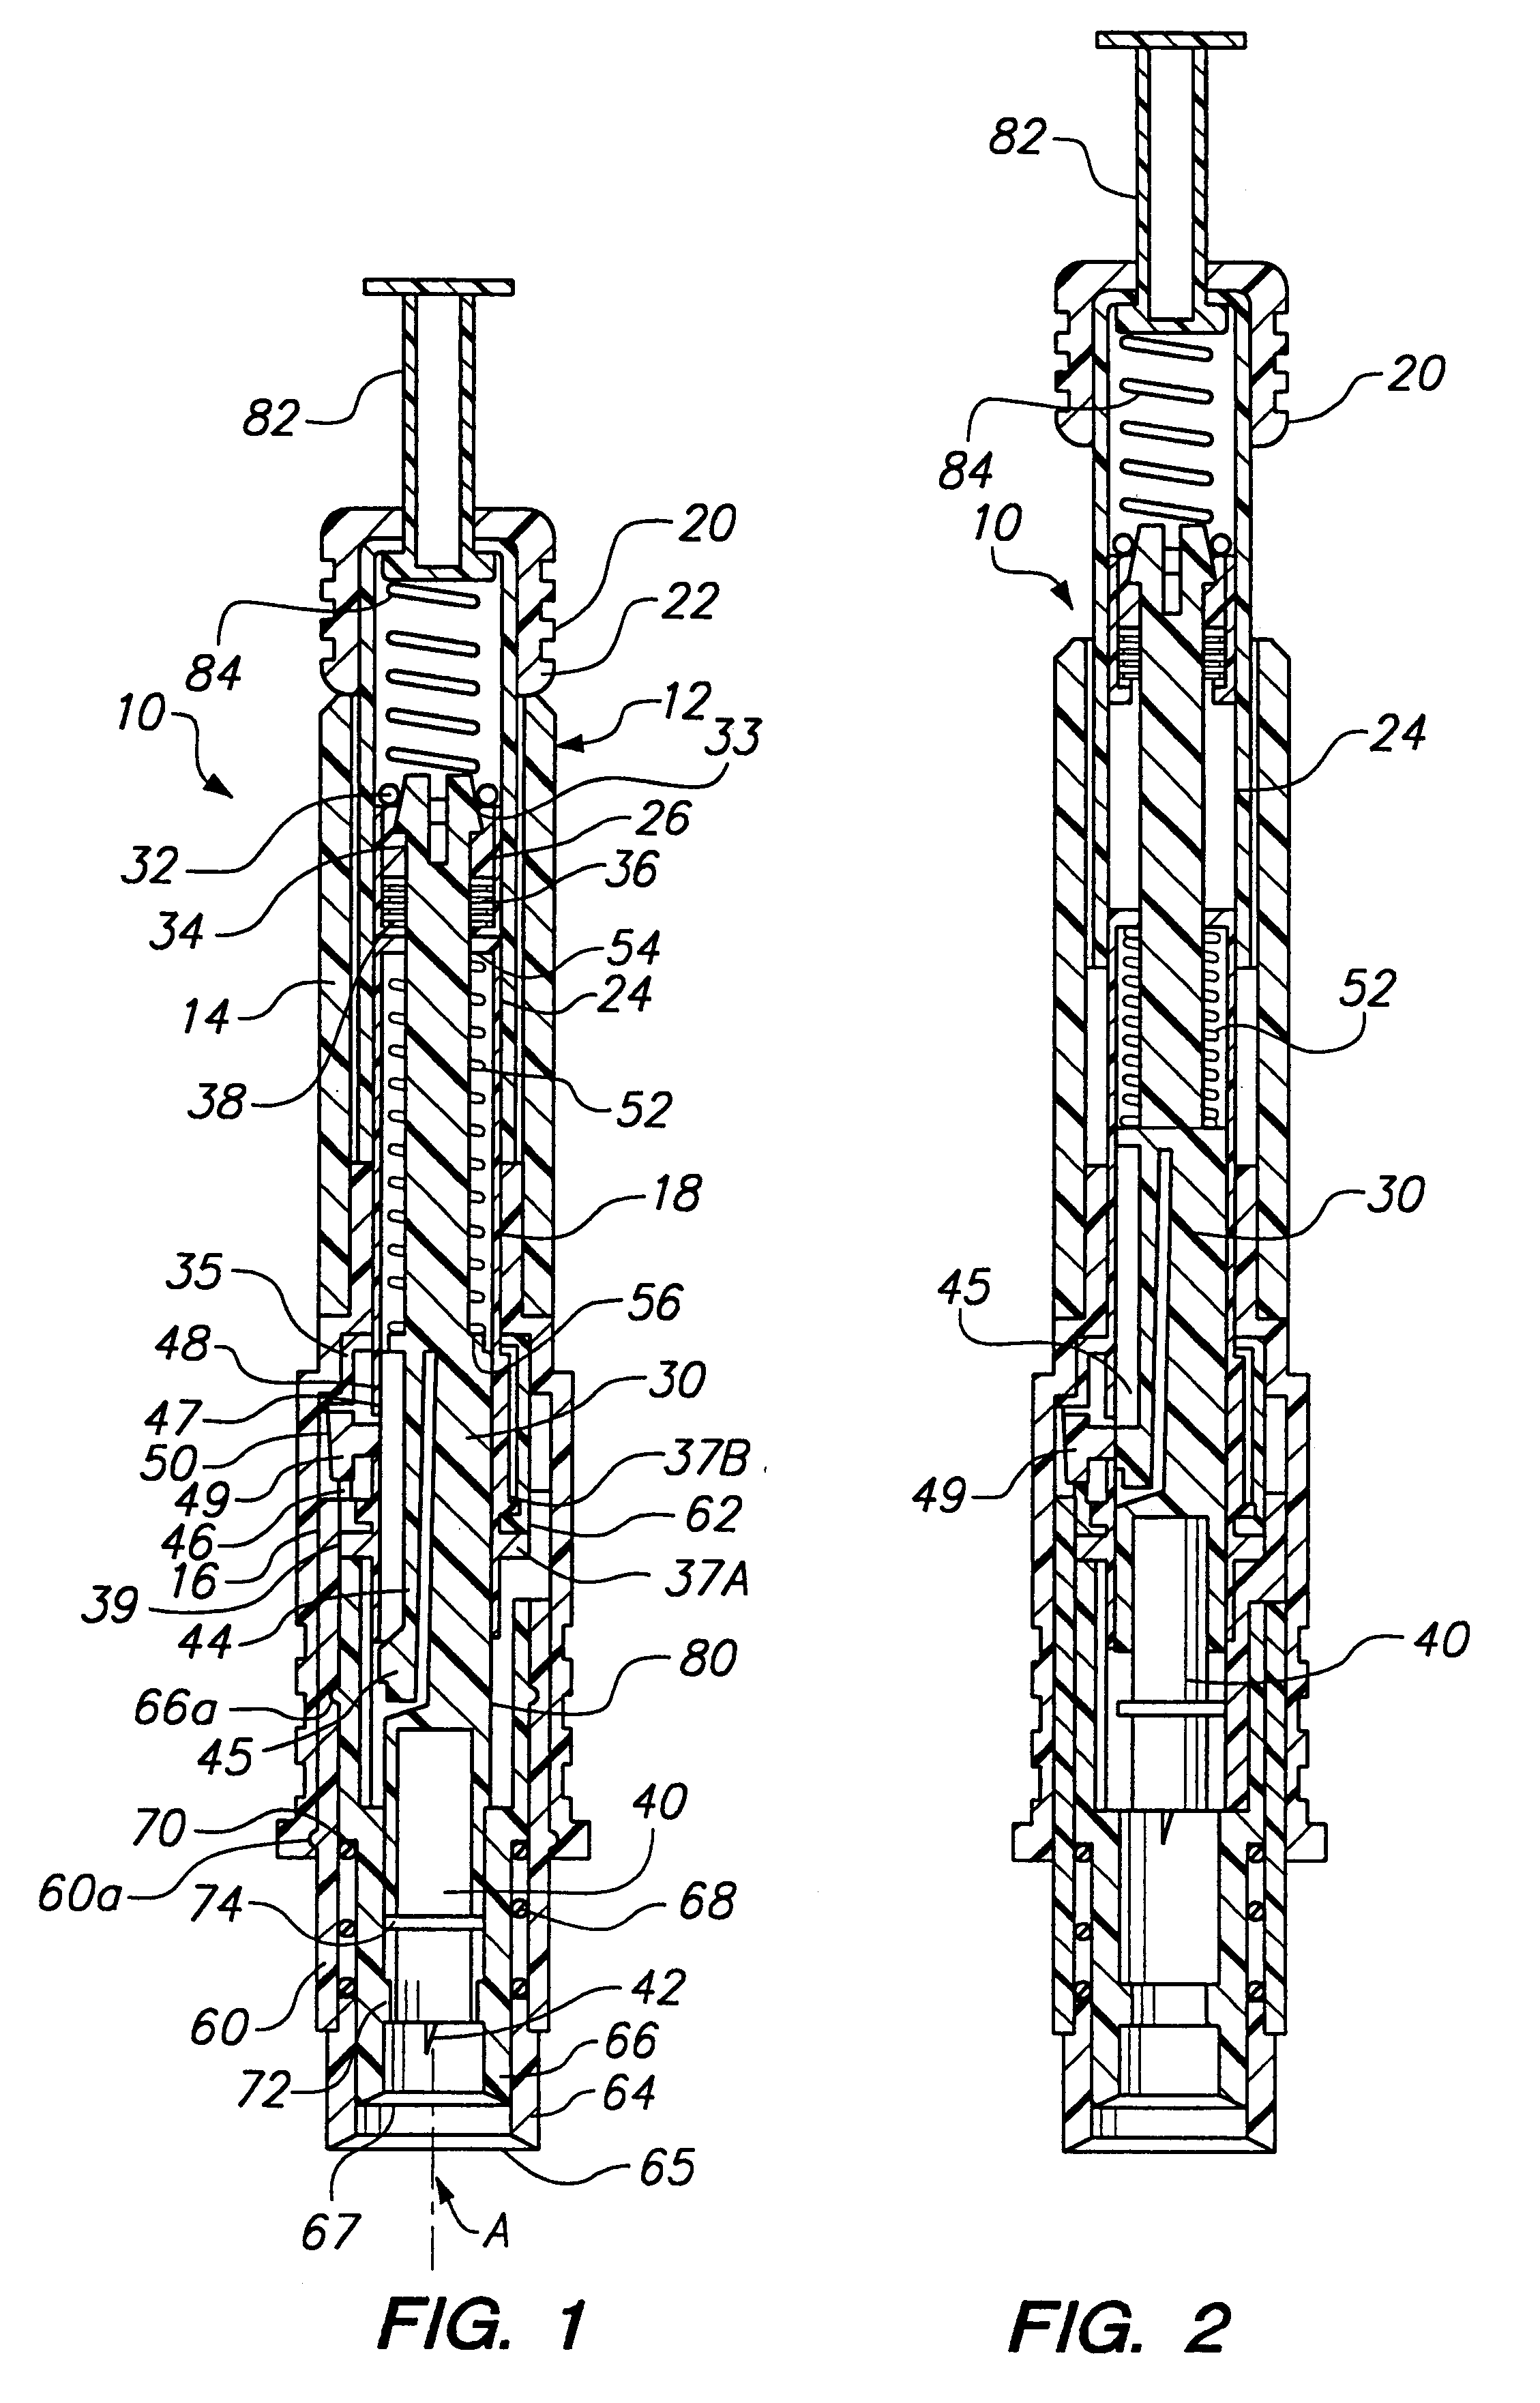 Apparatus for suctioning and pumping body fluid from an incision